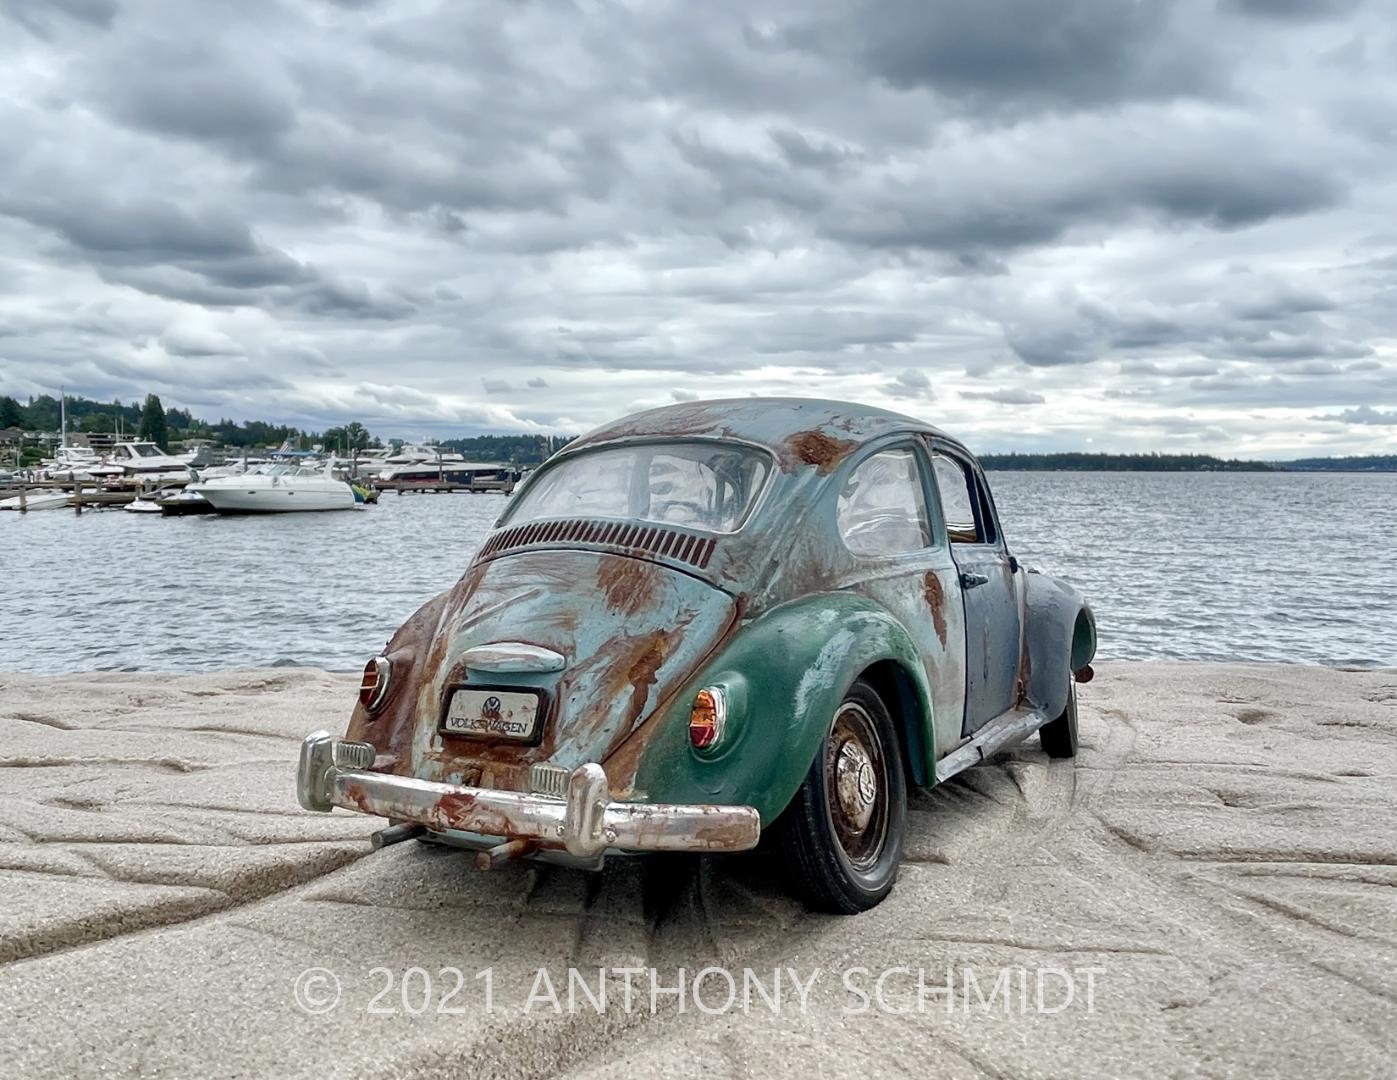 1967 Beetle on the Beach (1 of 3)